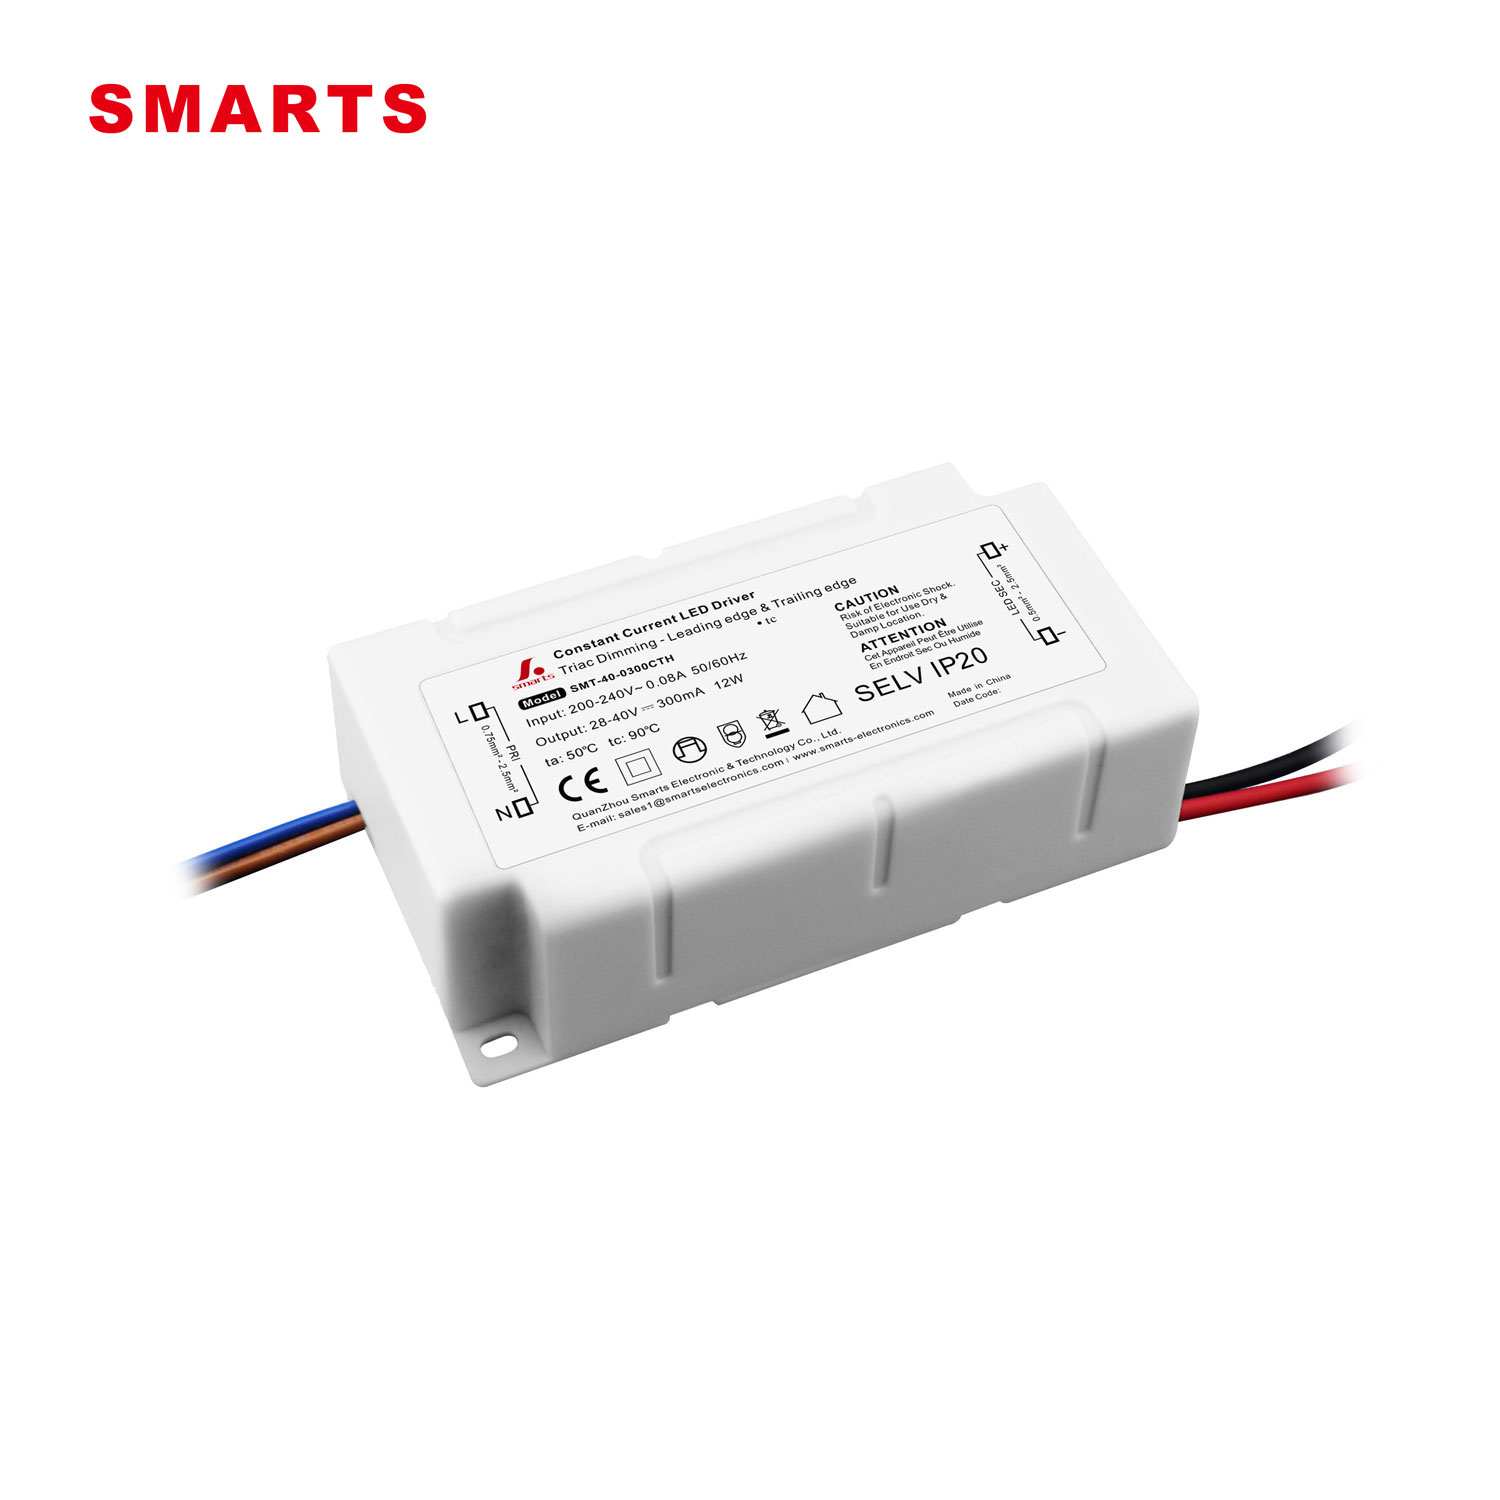 12W CONSTANT CURRENT LED DRIVER